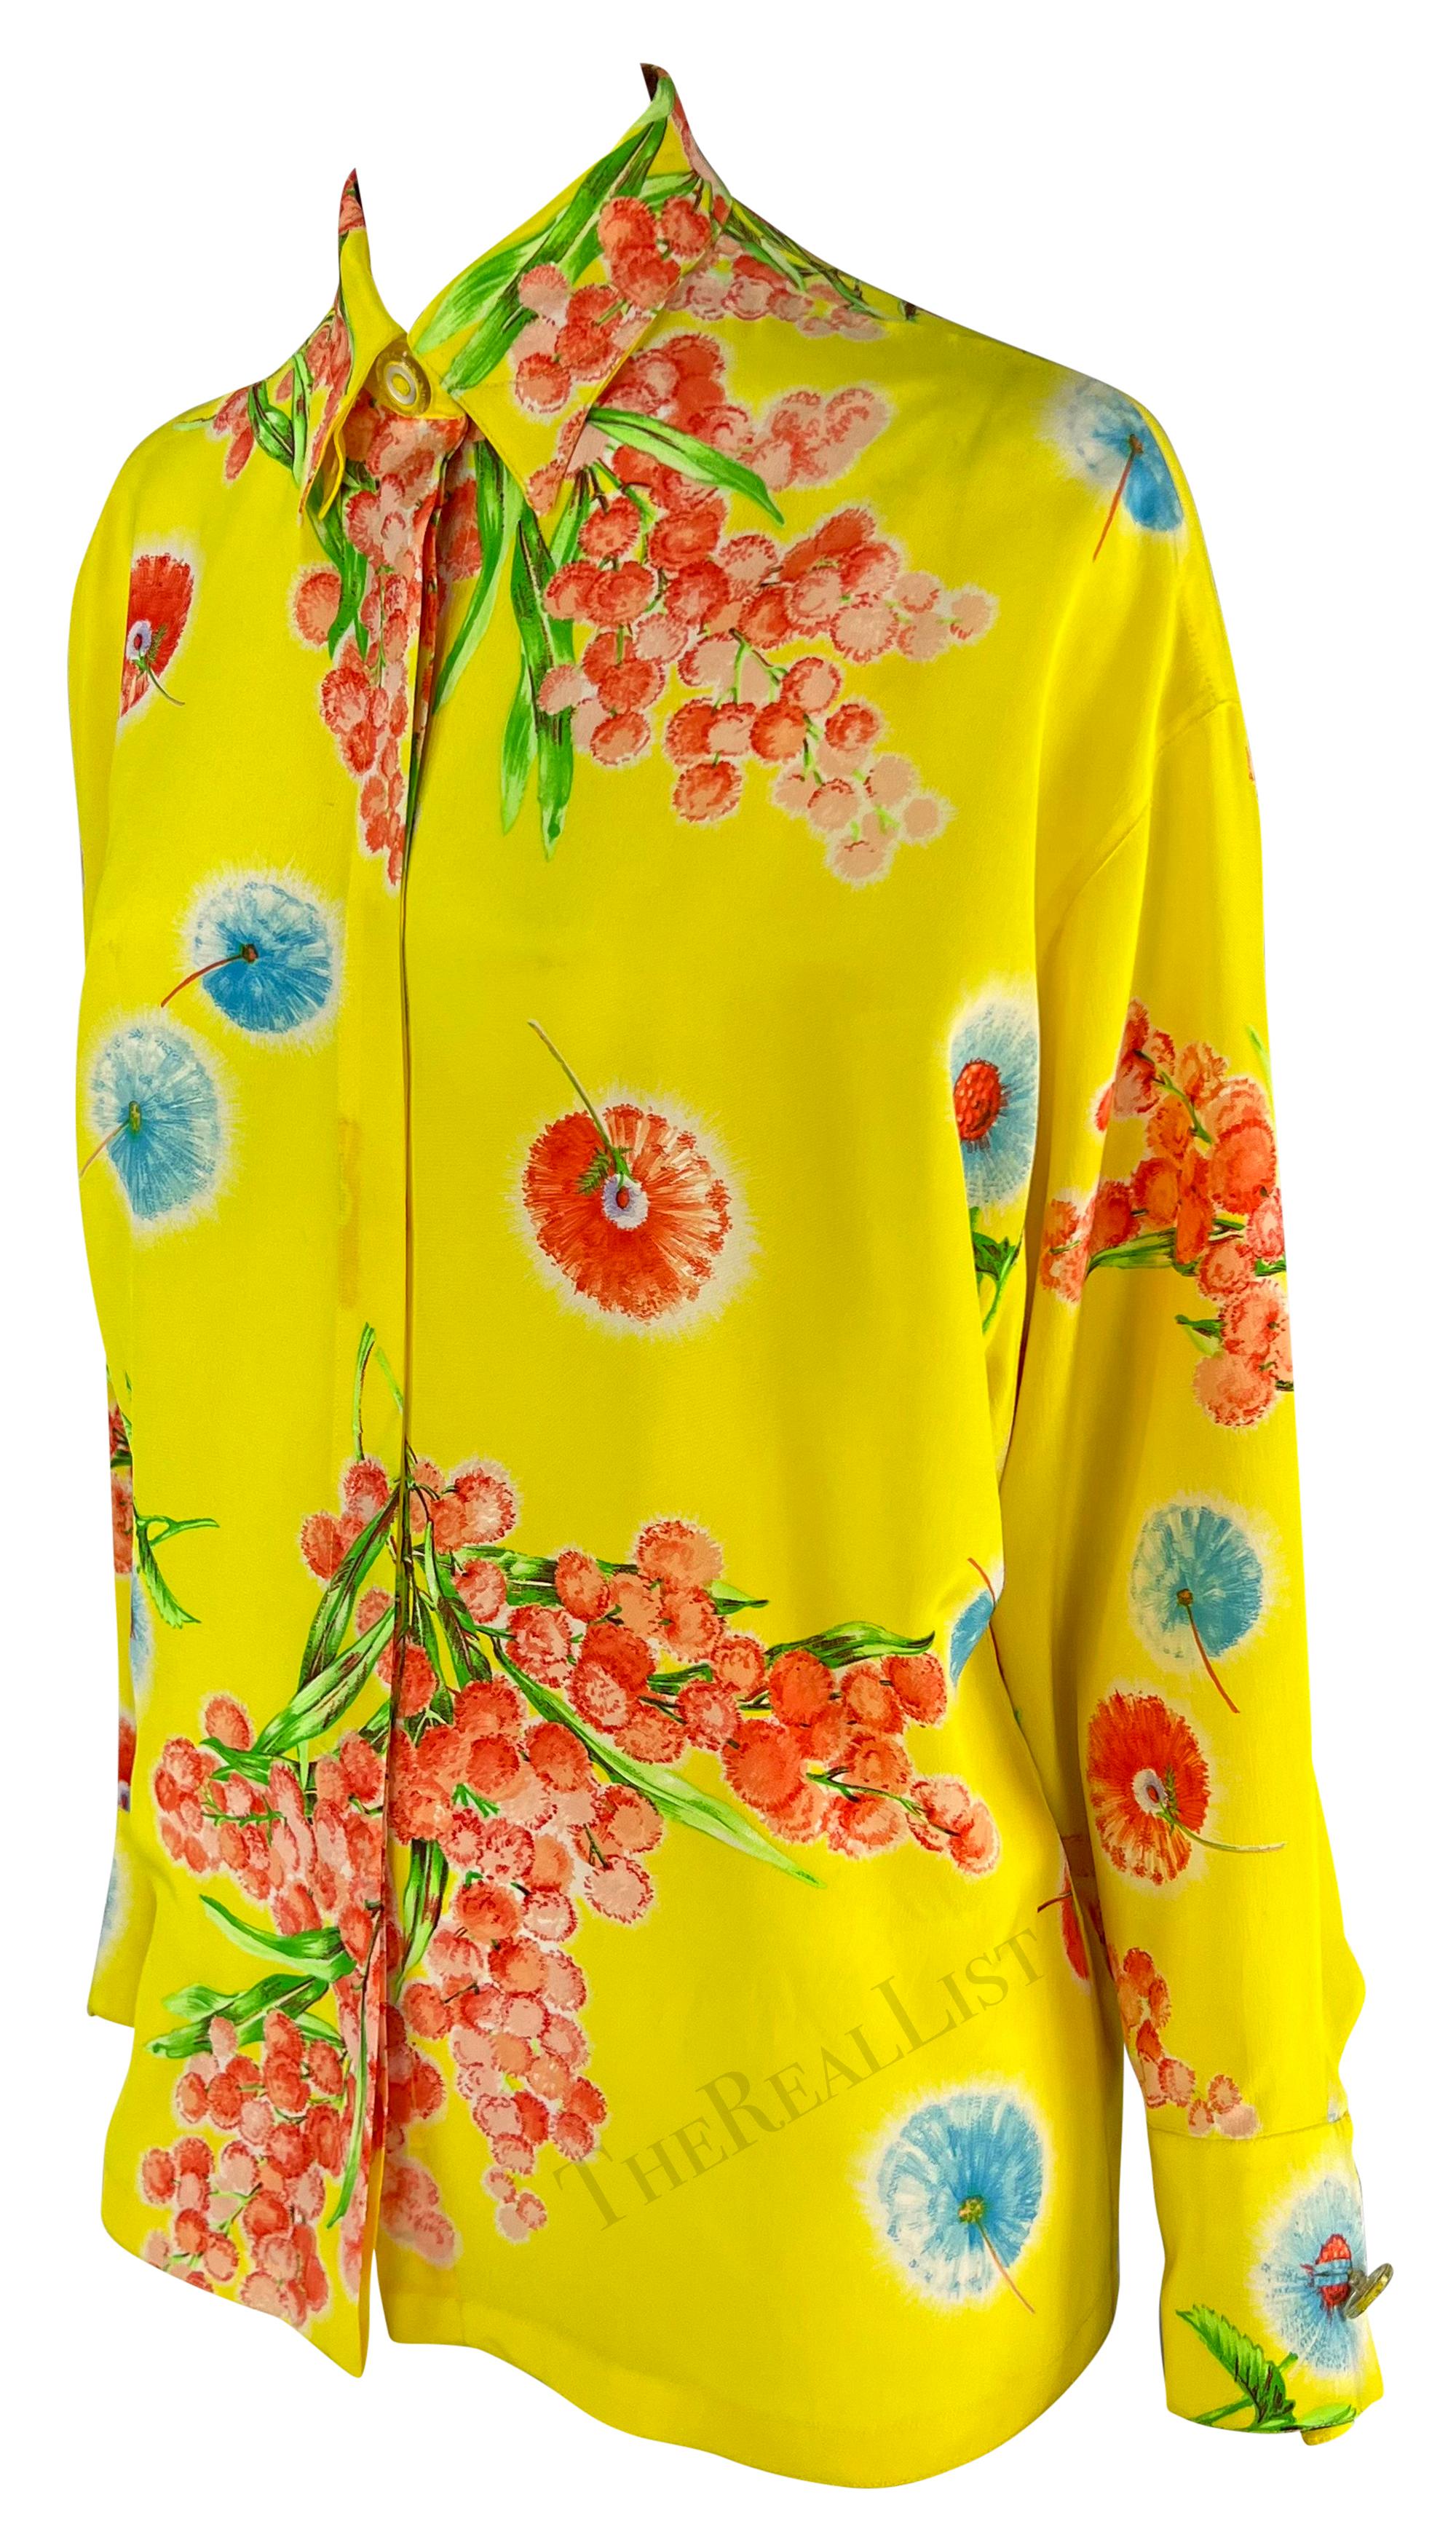 1996 Gianni Versace Yellow Floral Silk Button Up Medusa In Excellent Condition For Sale In West Hollywood, CA